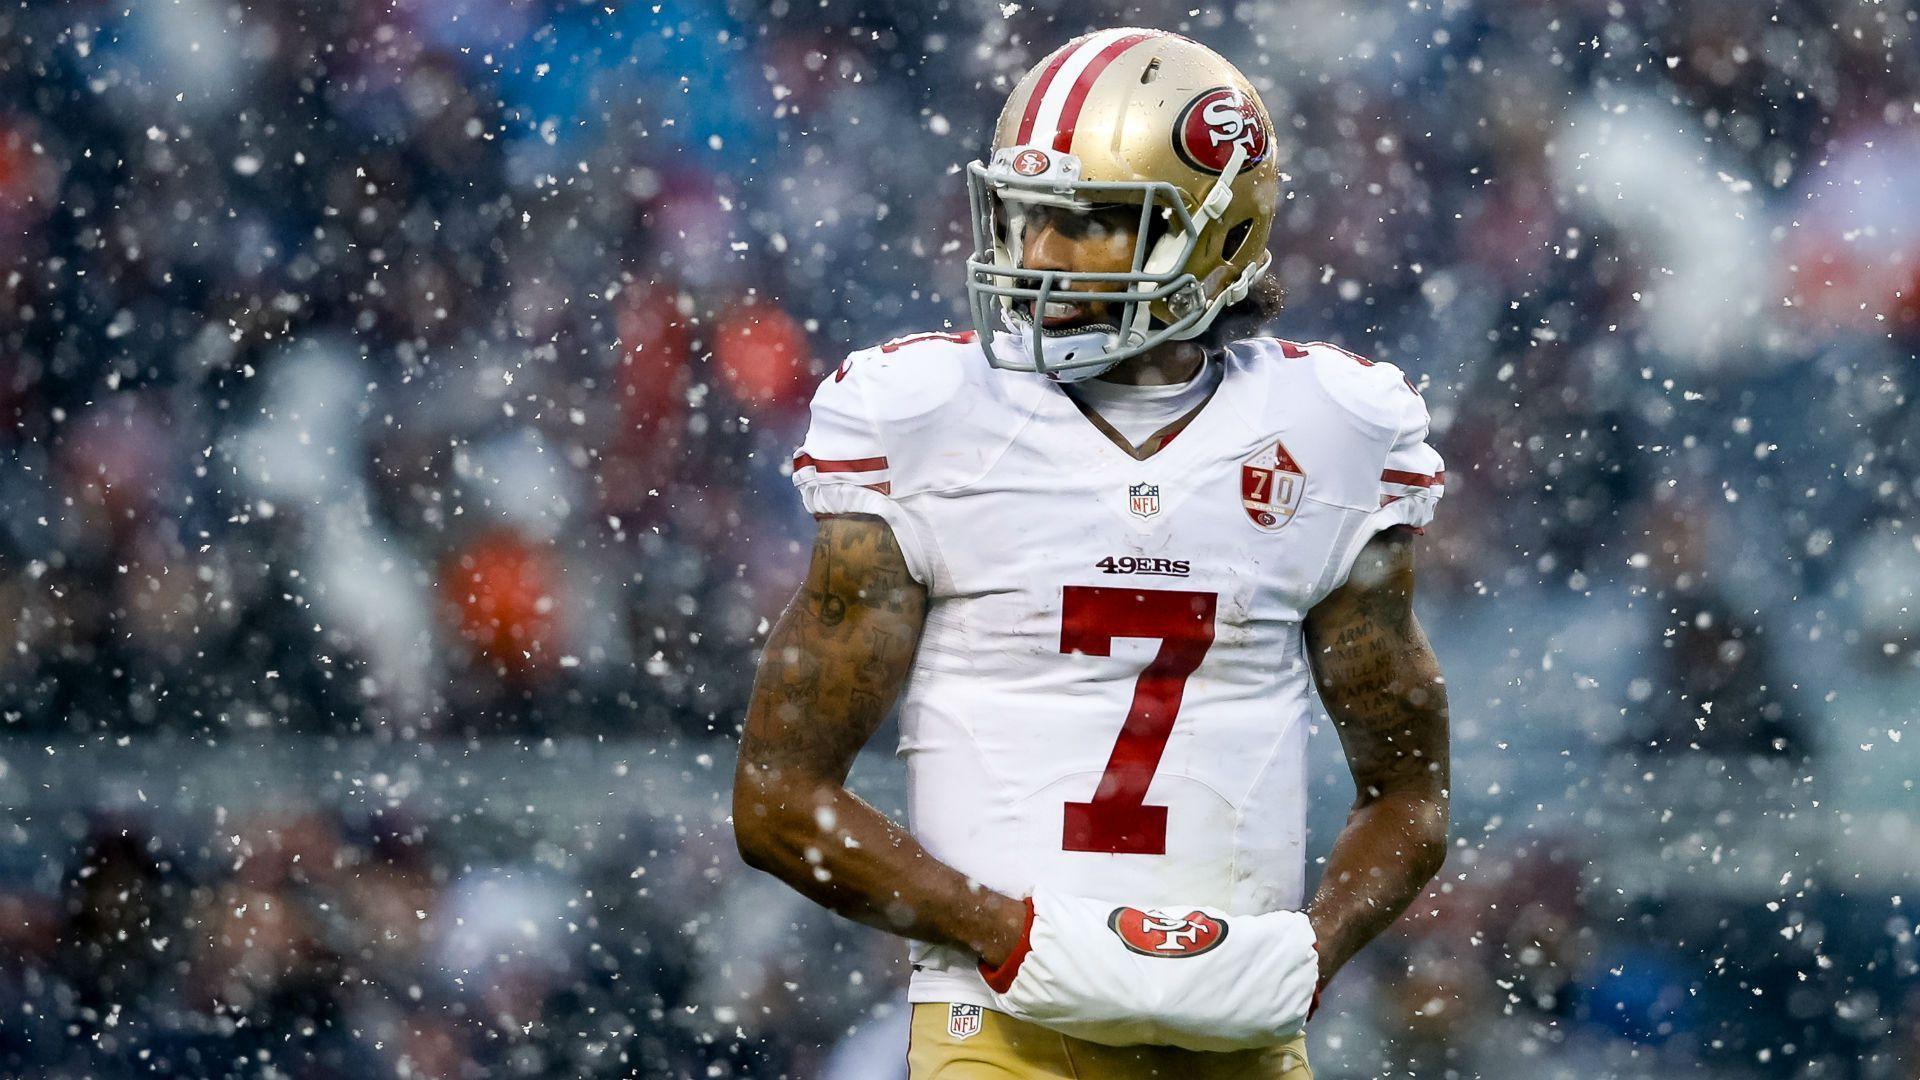 Colin Kaepernick blew his last chance to stick with 49ers, Chip